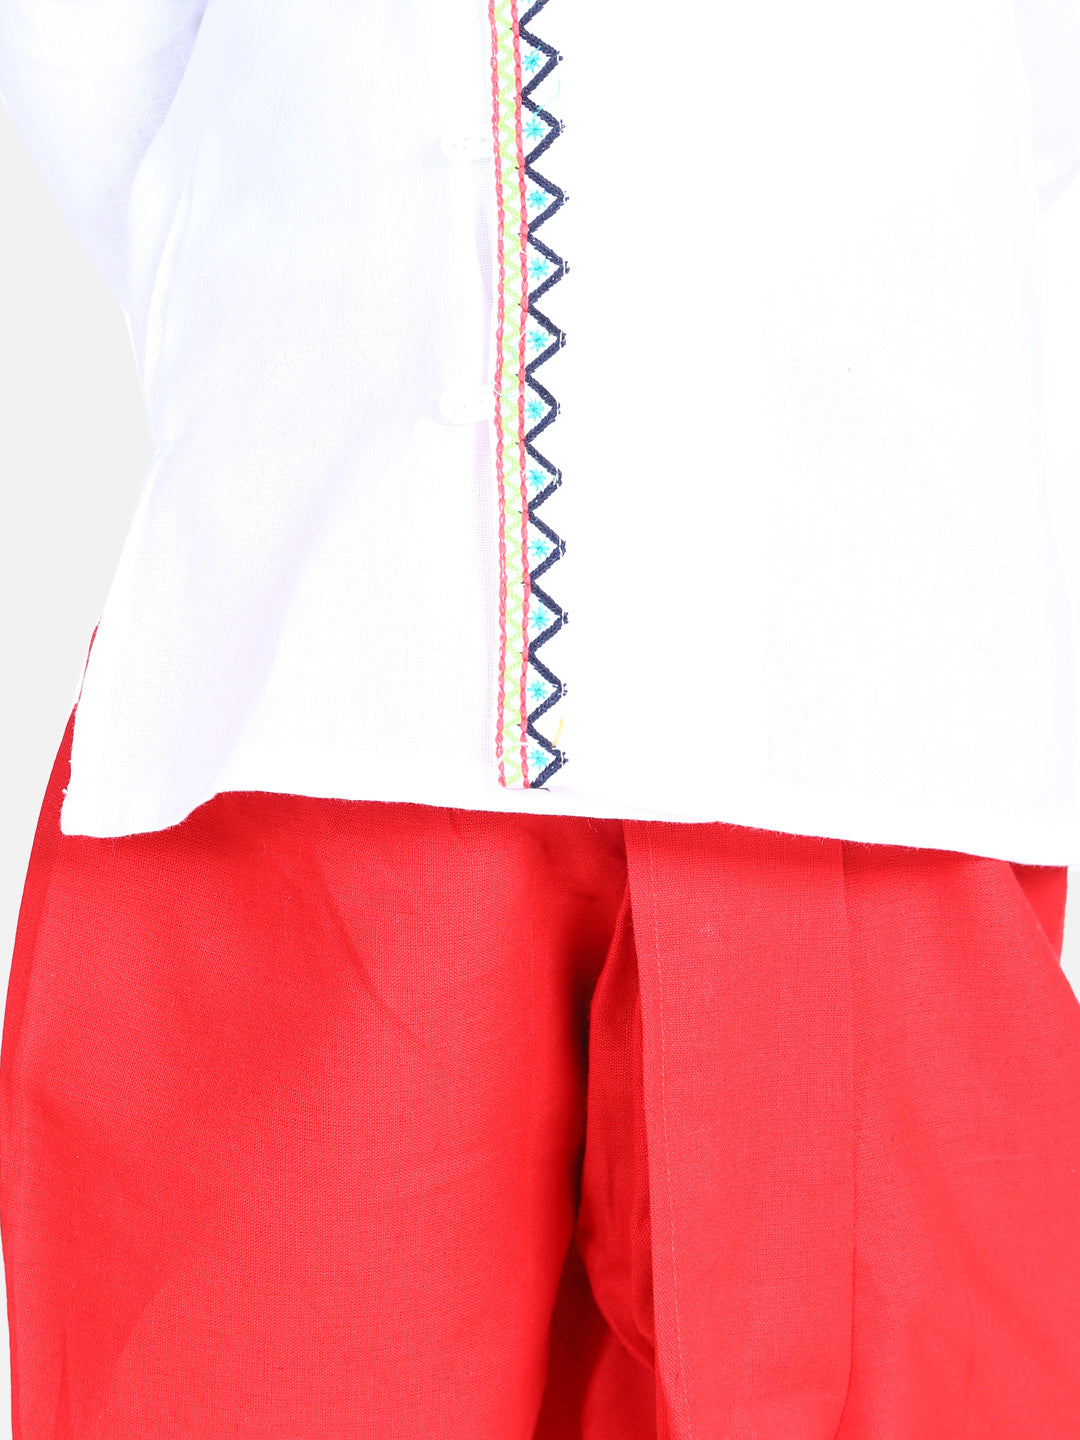 BownBee Front Open Embroidered Kurta Dhoti for Boys- White